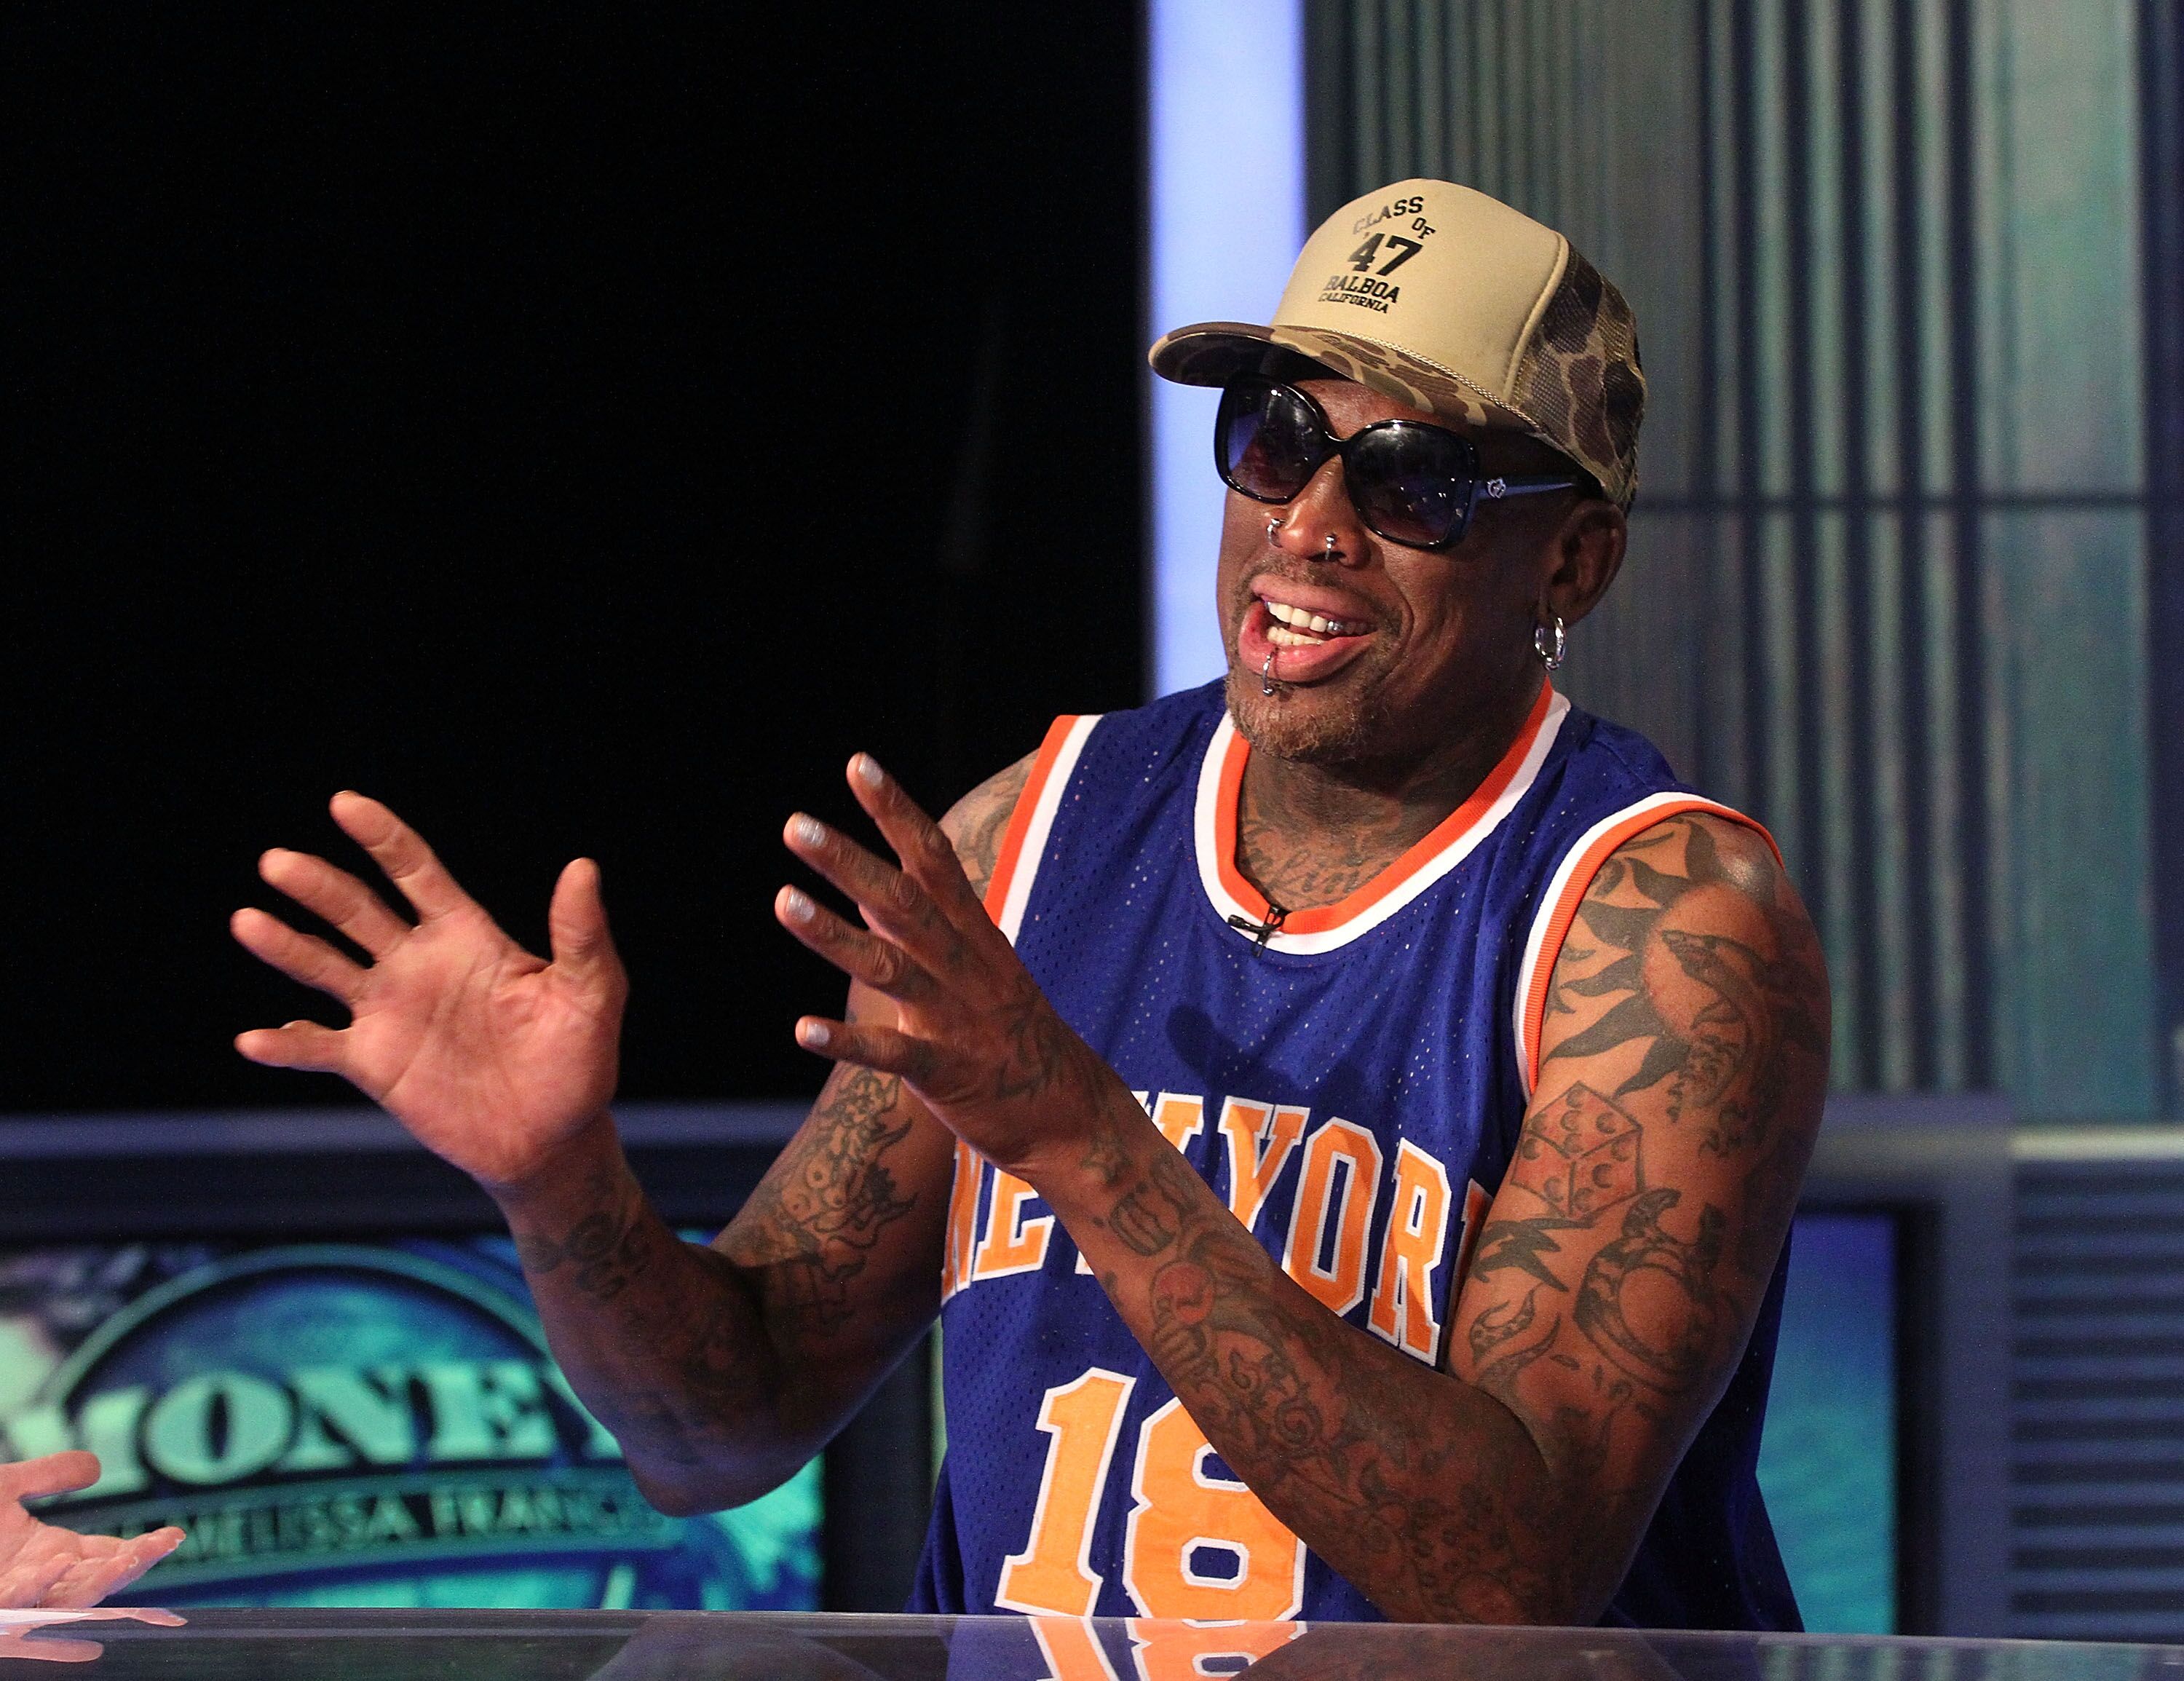 Dennis Rodman on December 9, 2014 in New York City | Photo: Getty Images